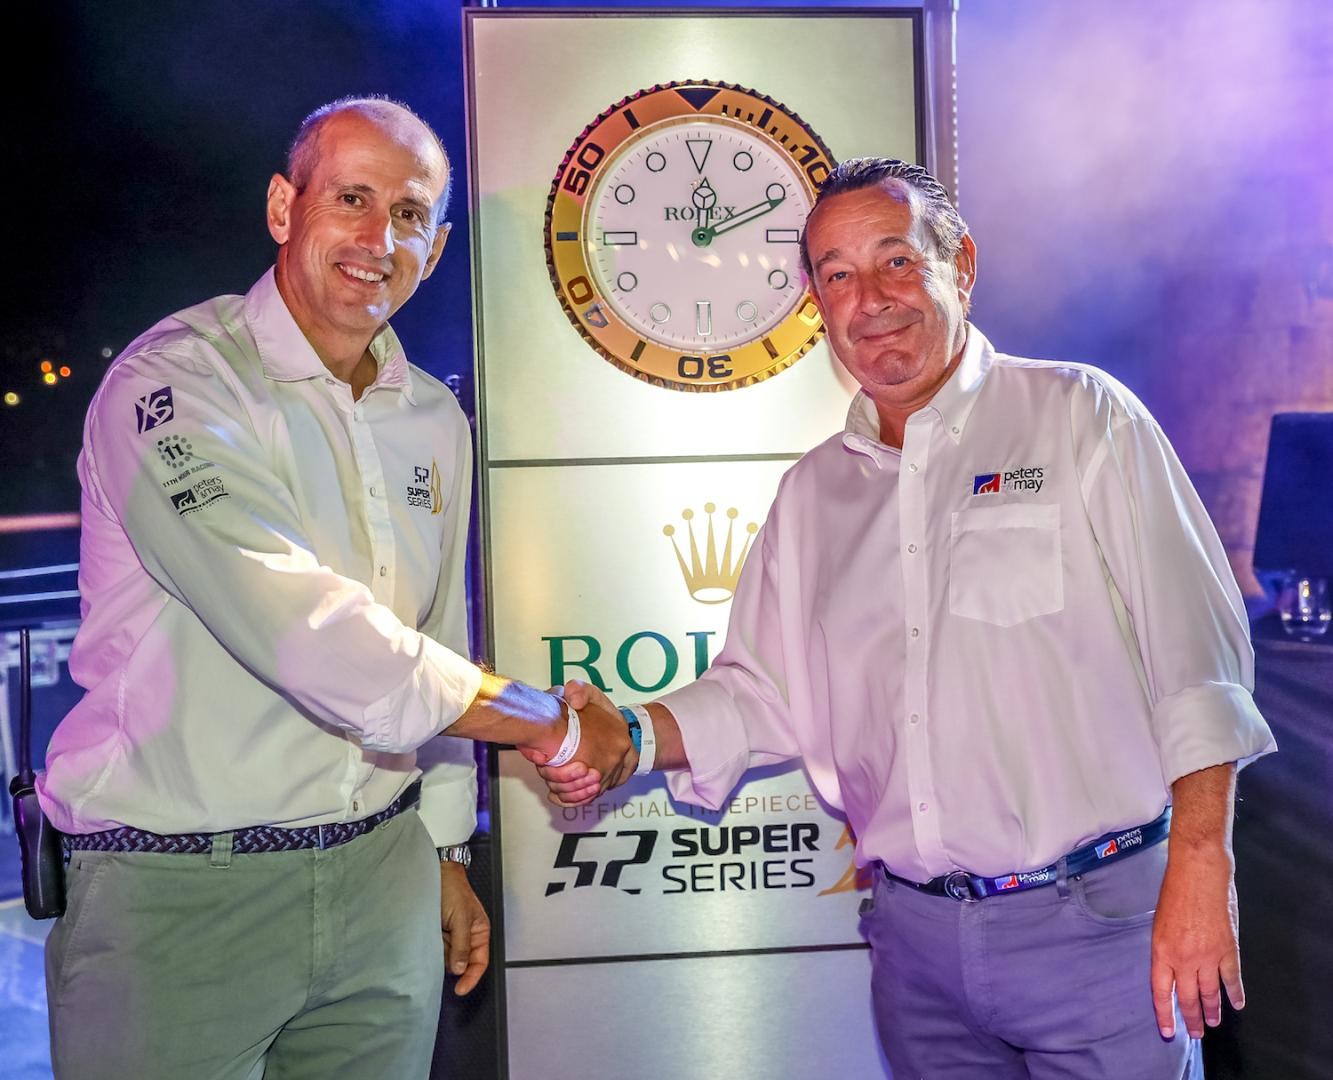 52 Super Series extends logistic partnership with Peters & May